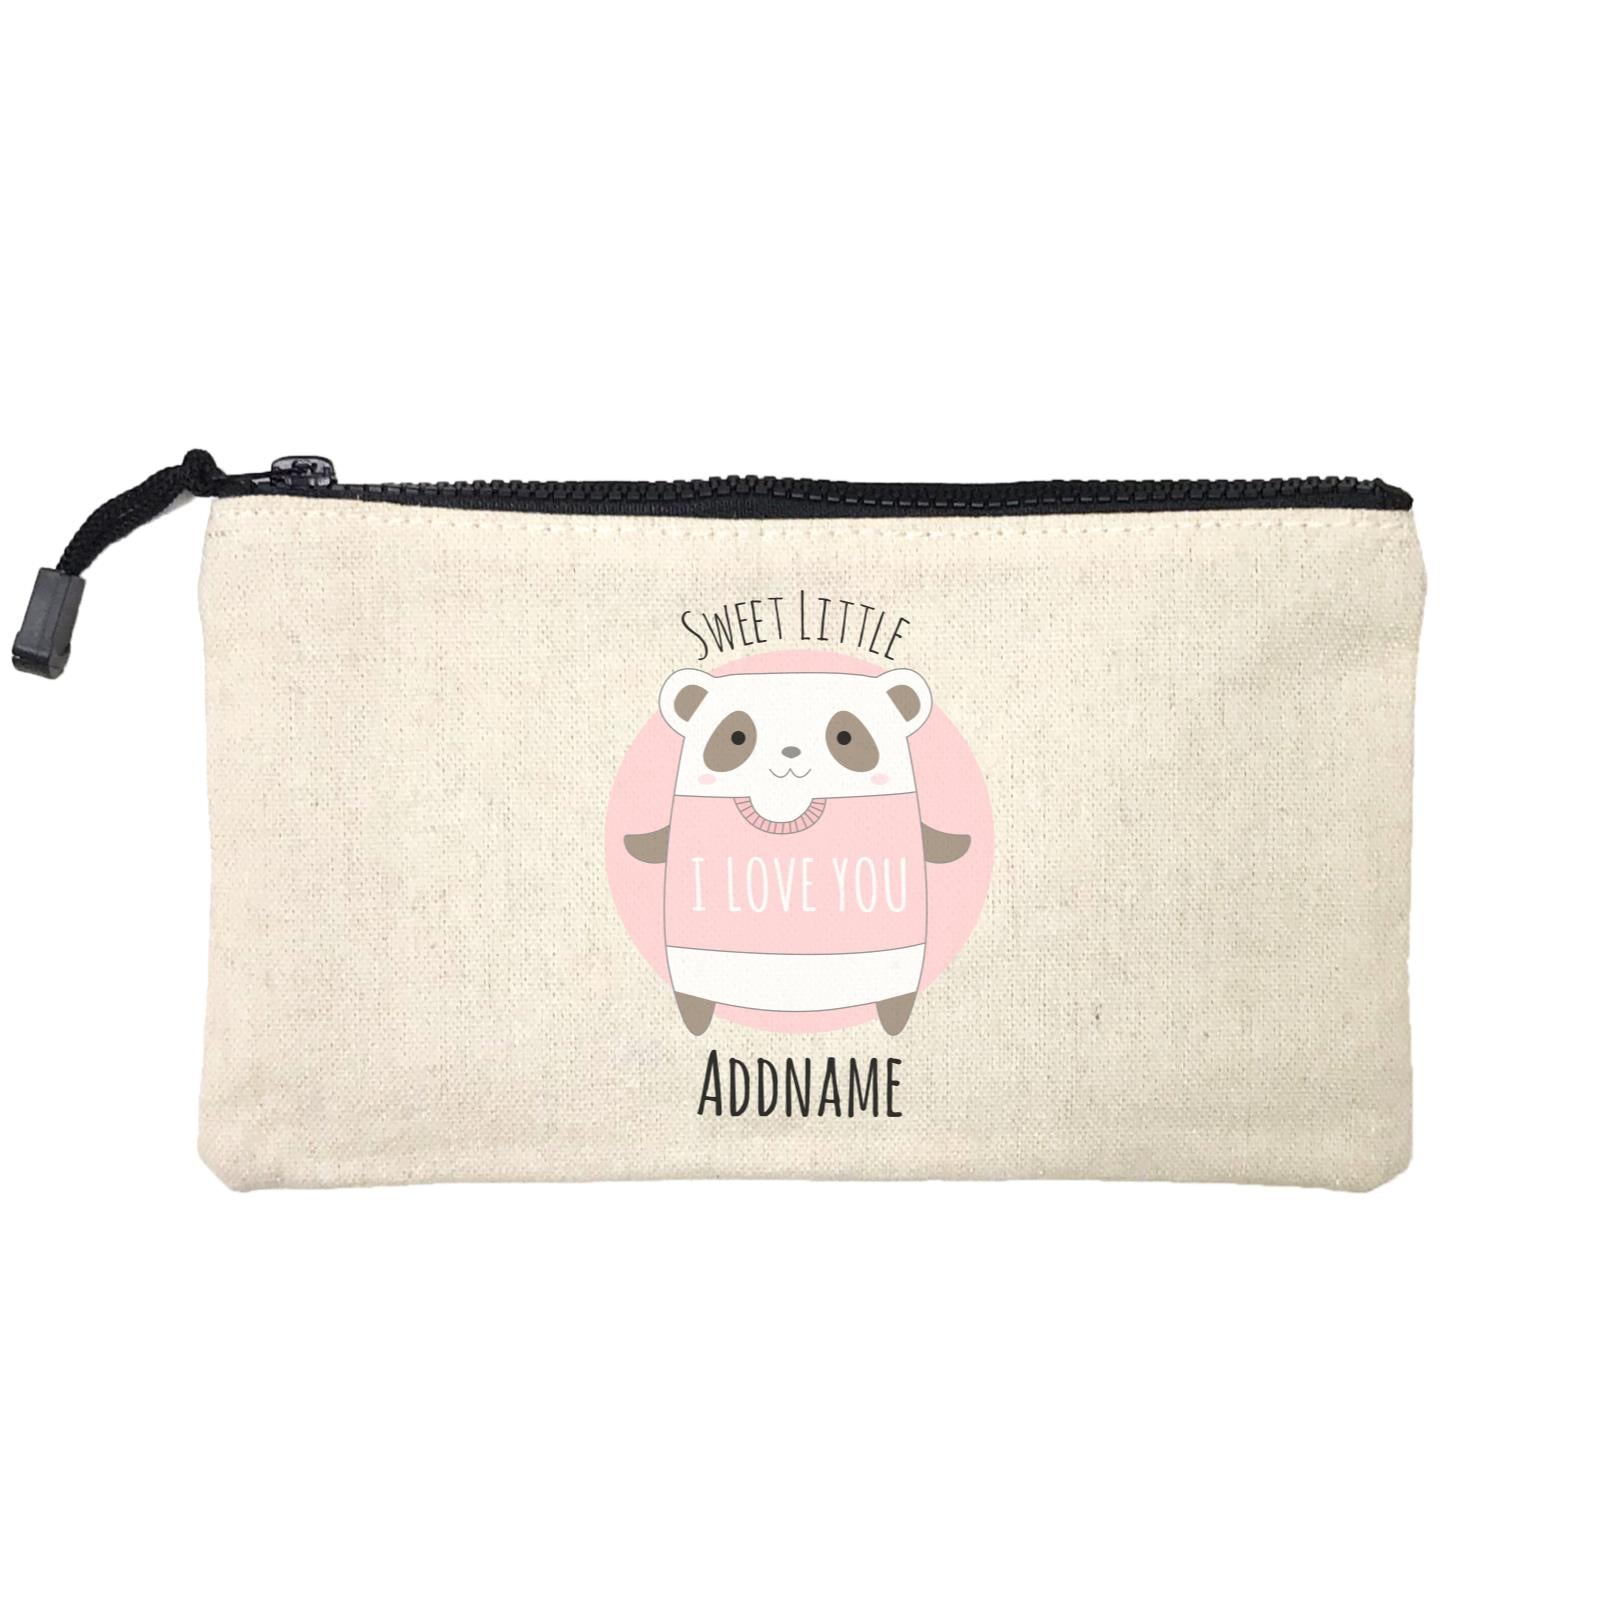 Sweet Animals Sketches Panda Sweet Little Addname Mini Accessories Stationery Pouch